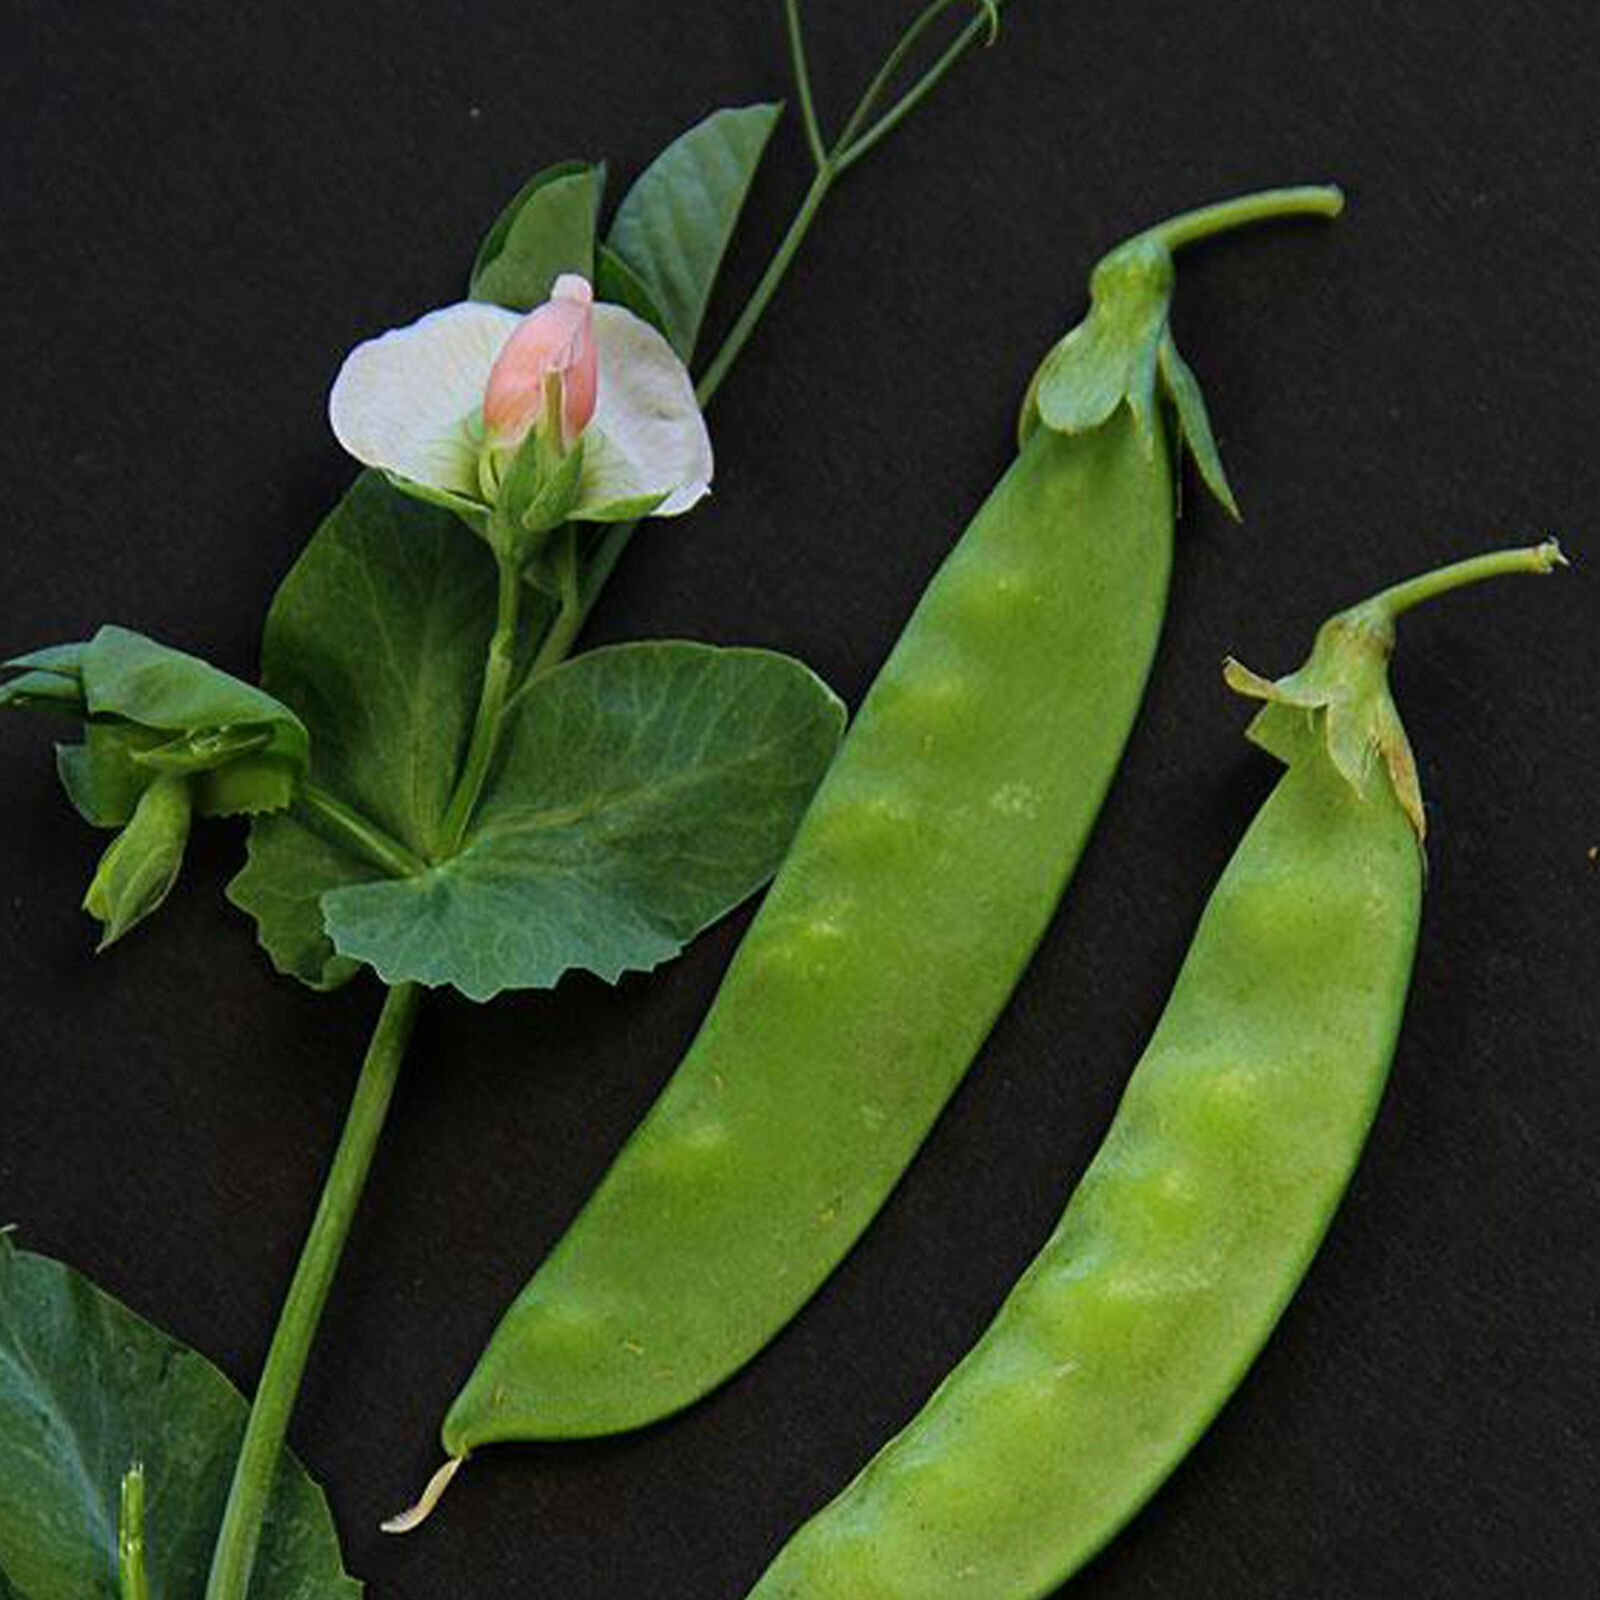 Primary image for SHIP FROM US 1 OZ ~120 SEEDS - ORGANIC TAIWAN SUGAR PEA SEEDS - NON-GMO, TM11